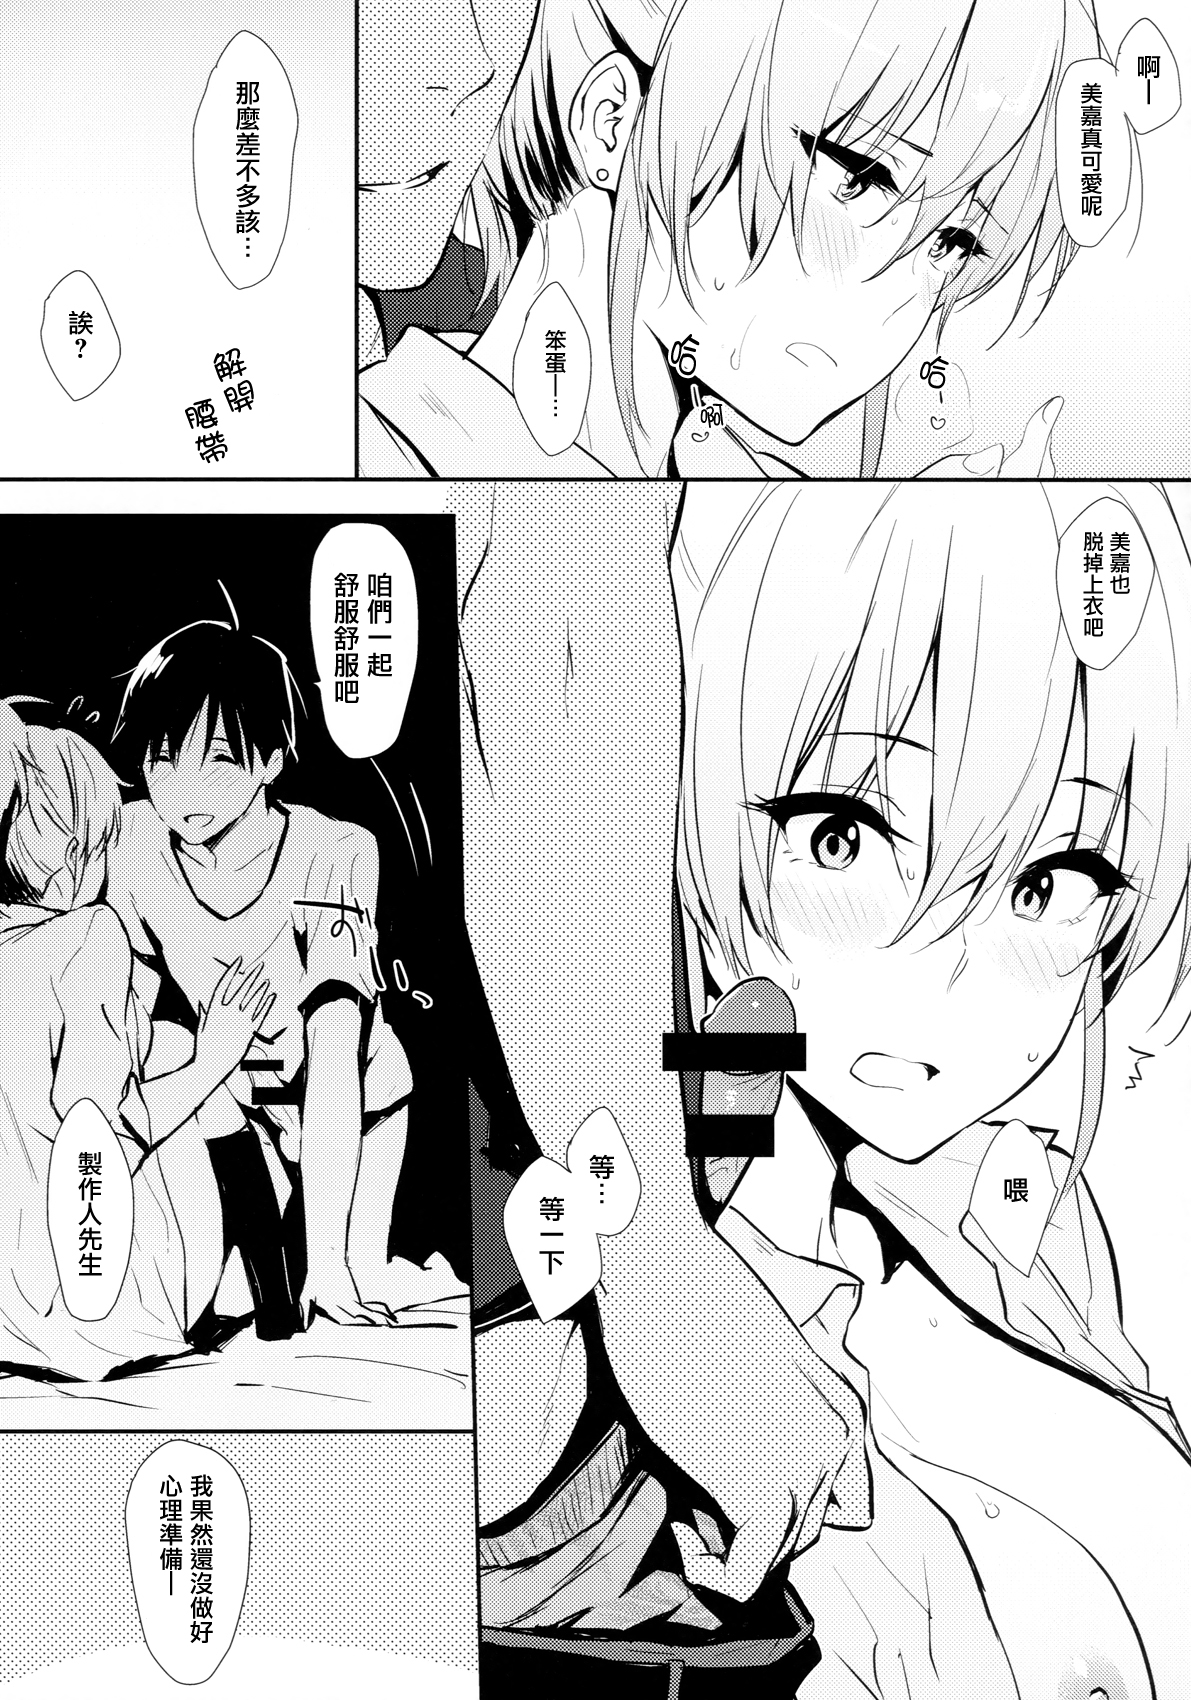 (COMIC1☆9) [Cat Food (NaPaTa)] Mika-ppoi no! (THE IDOLM@STER CINDERELLA GIRLS) [Chinese] [无毒汉化组] page 9 full